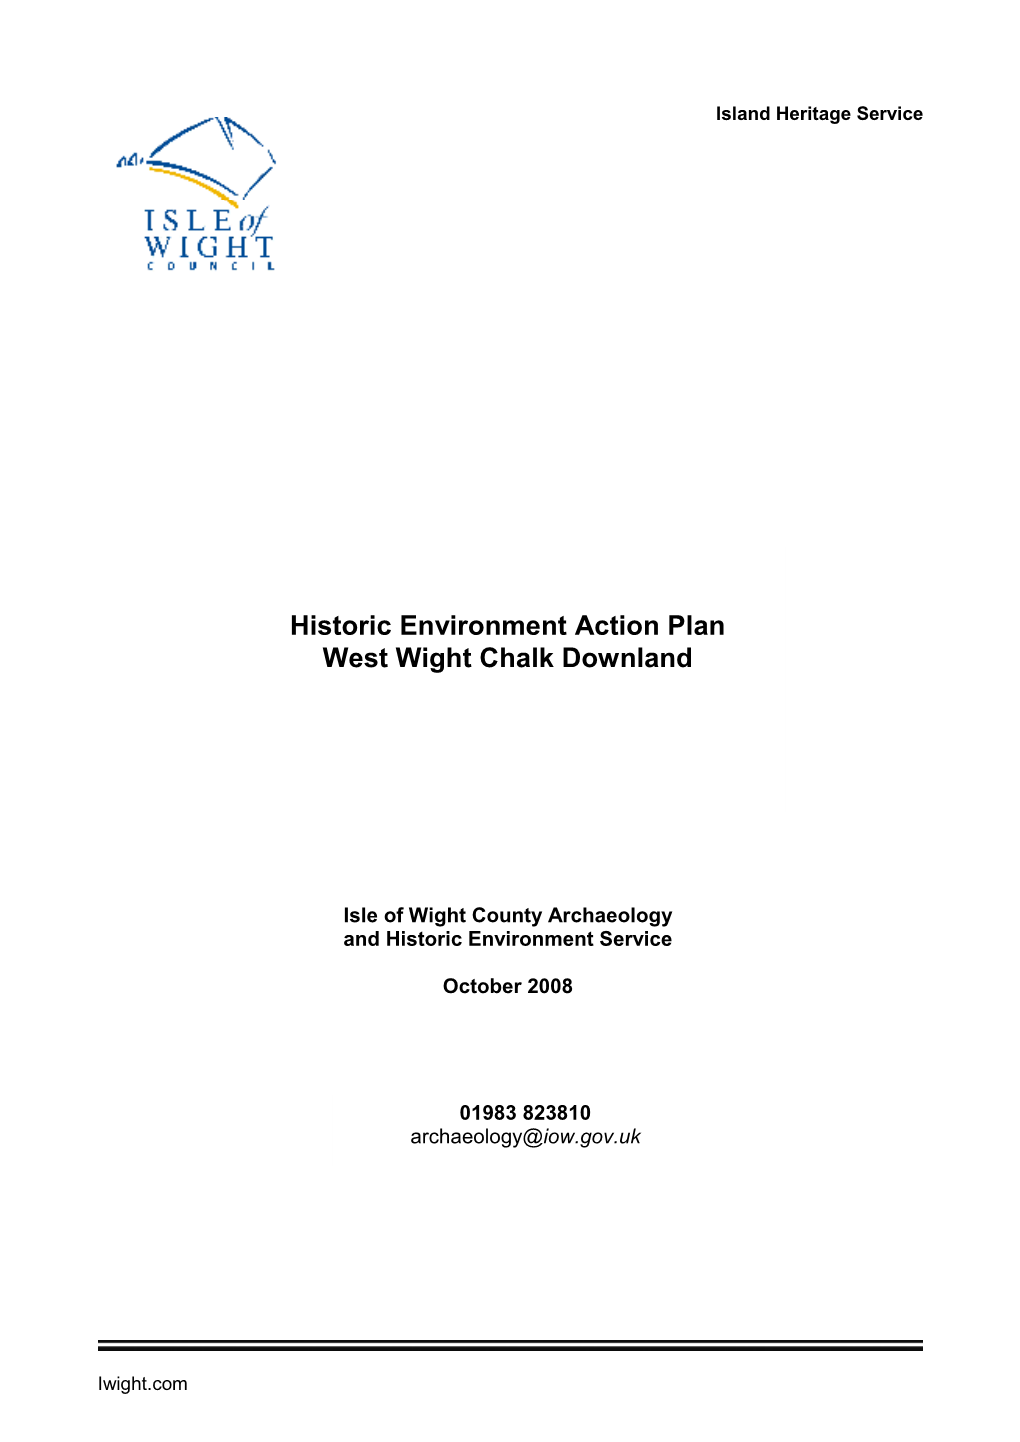 Historic Environment Action Plan West Wight Chalk Downland